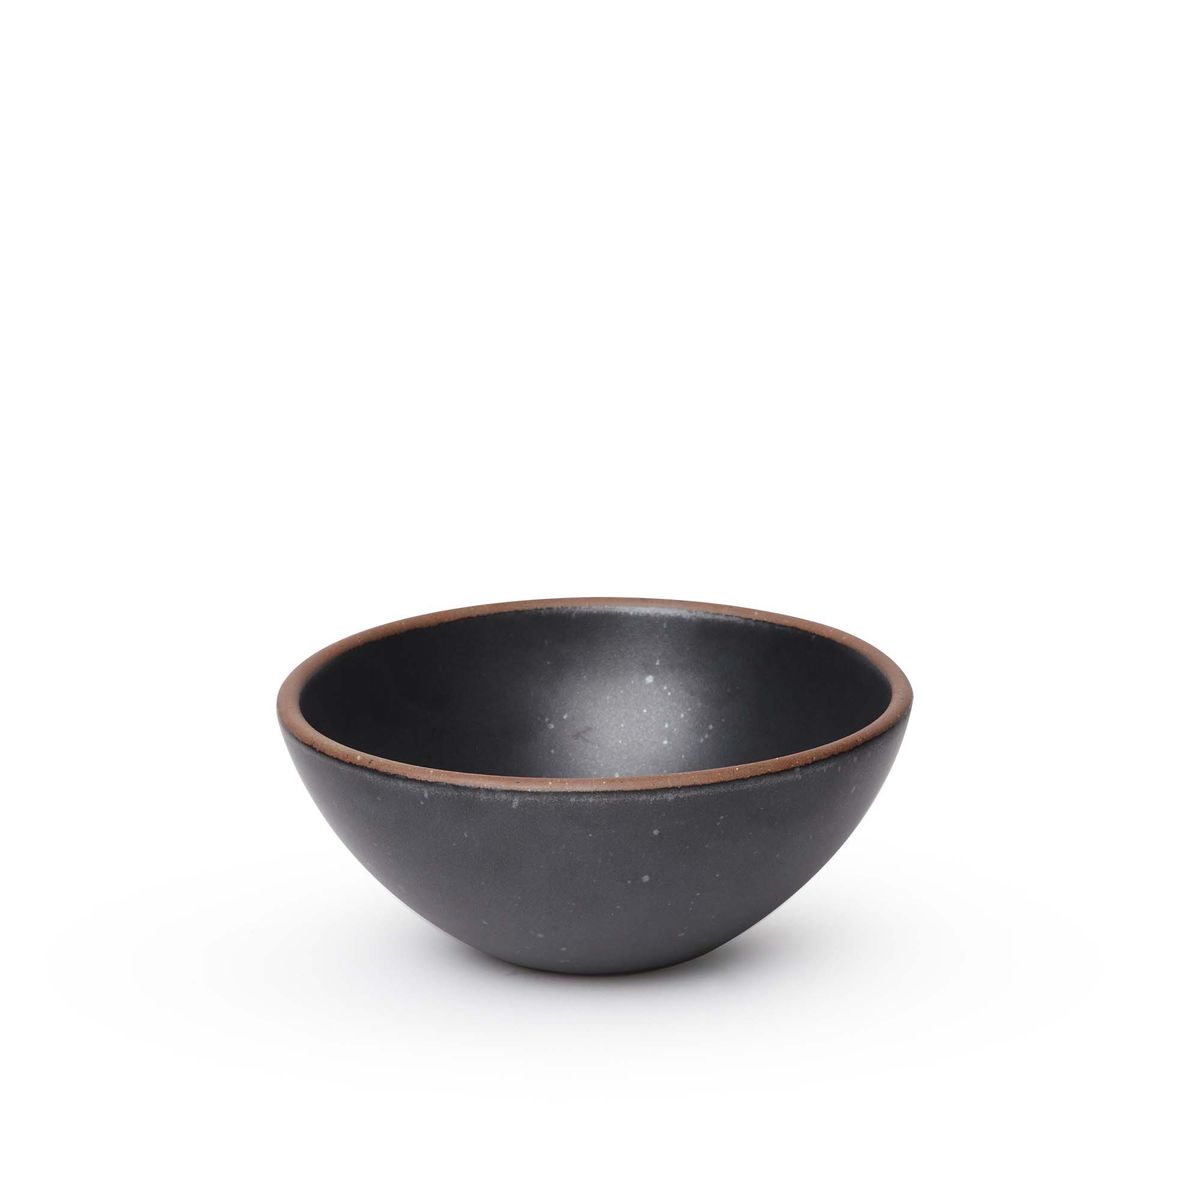 A medium rounded ceramic bowl in a graphite black color featuring iron speckles and an unglazed rim